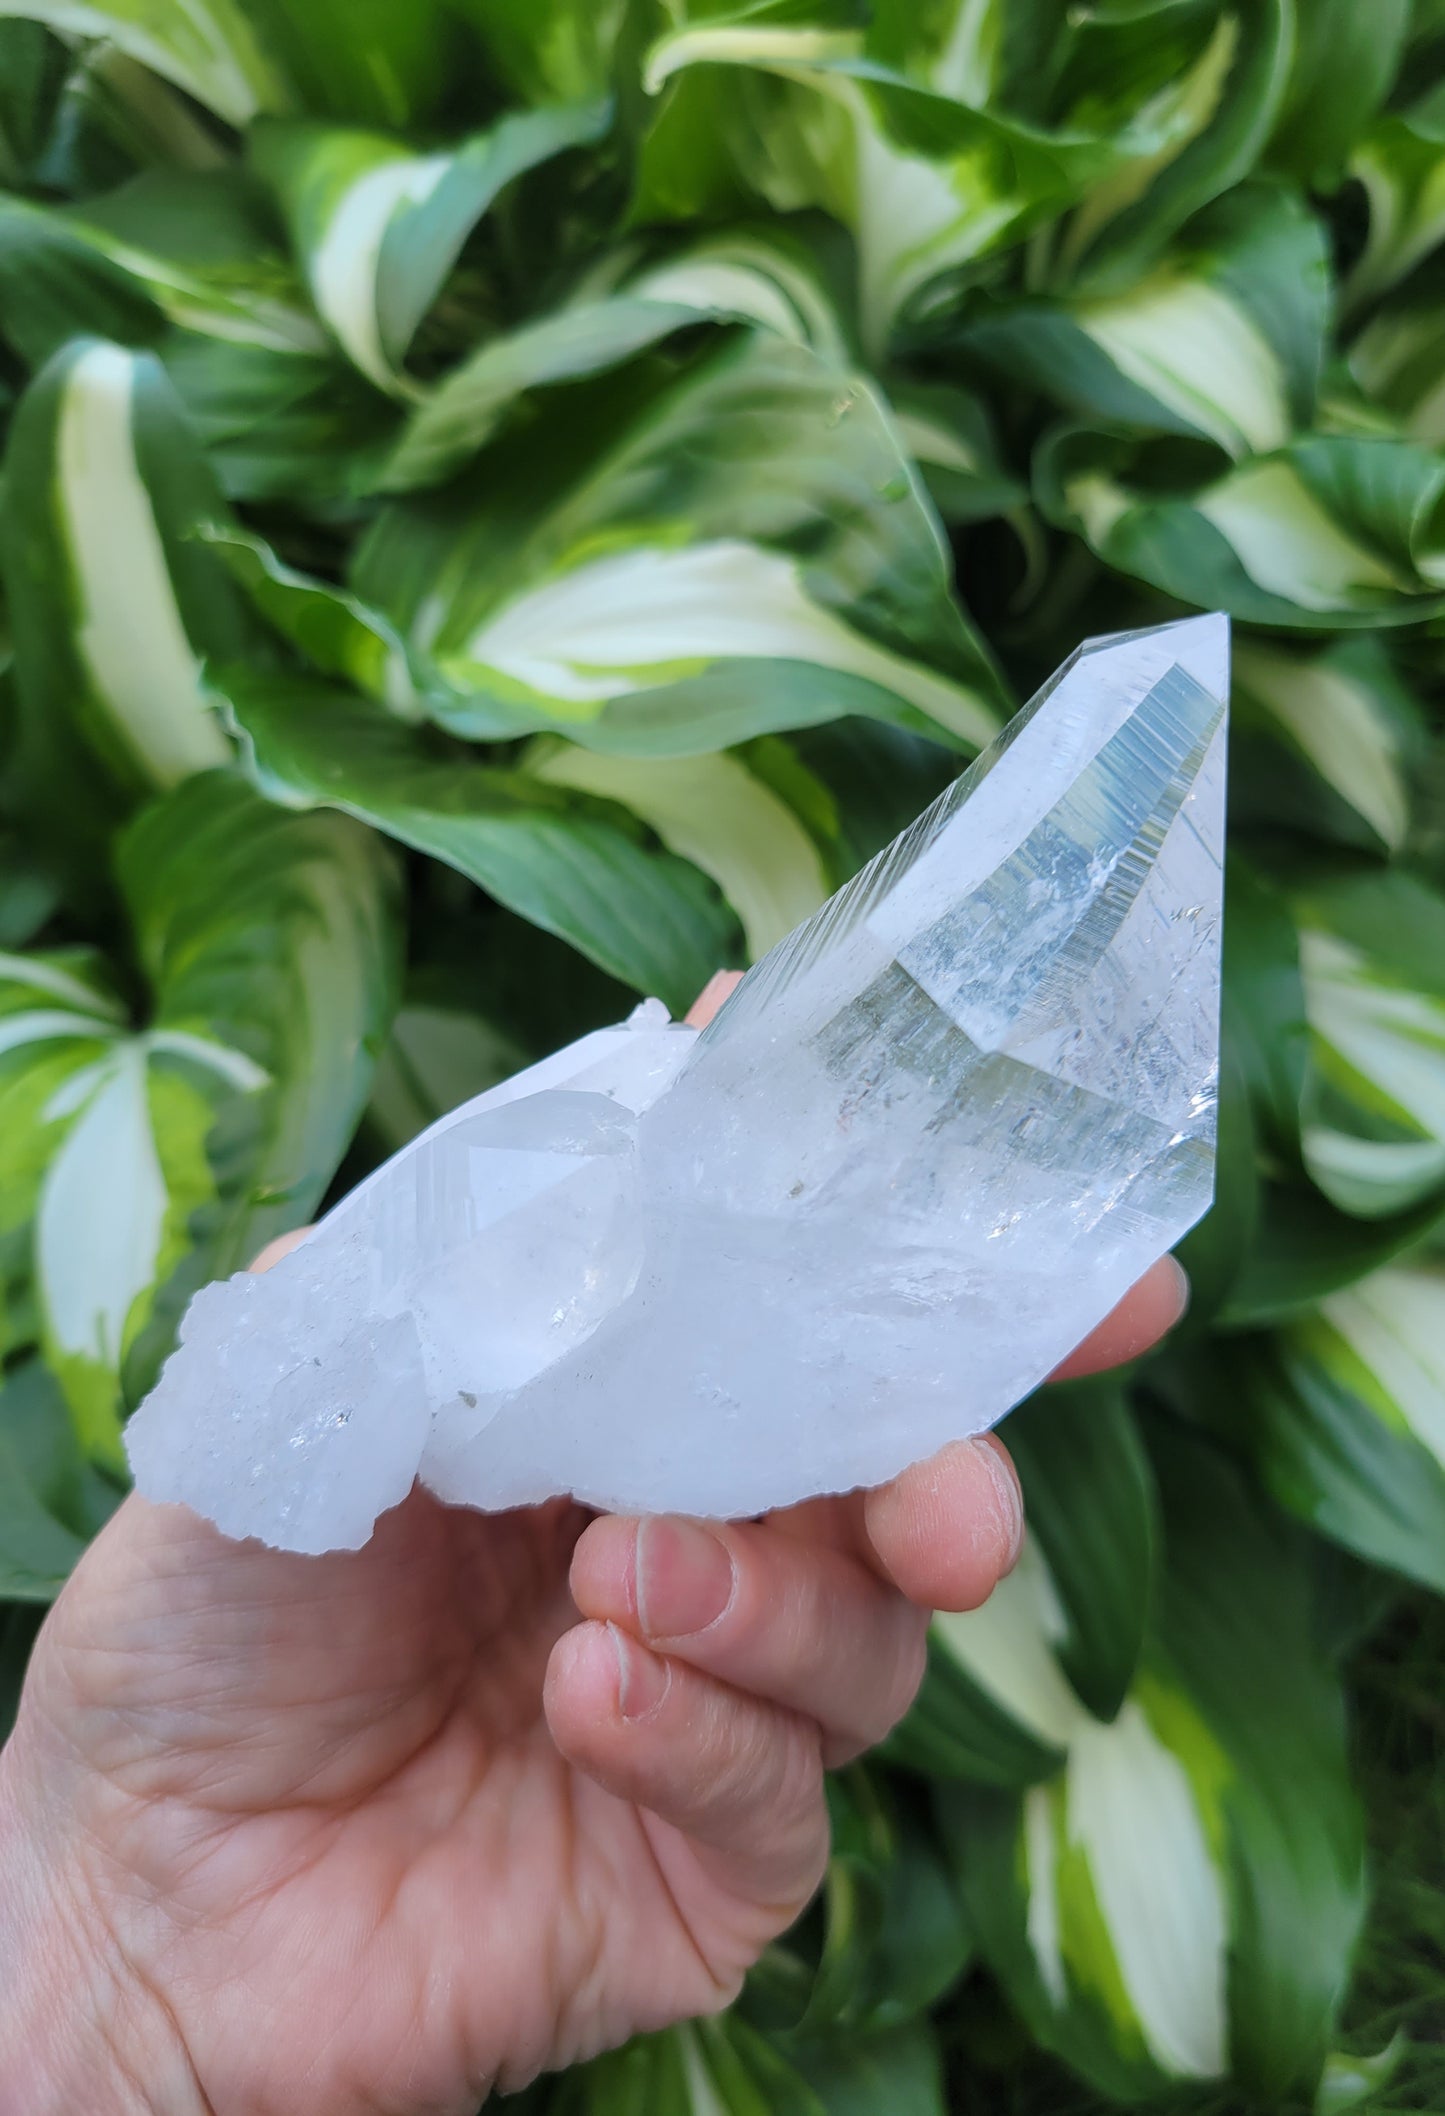 Quartz (Lemurian) Cluster from Colombia